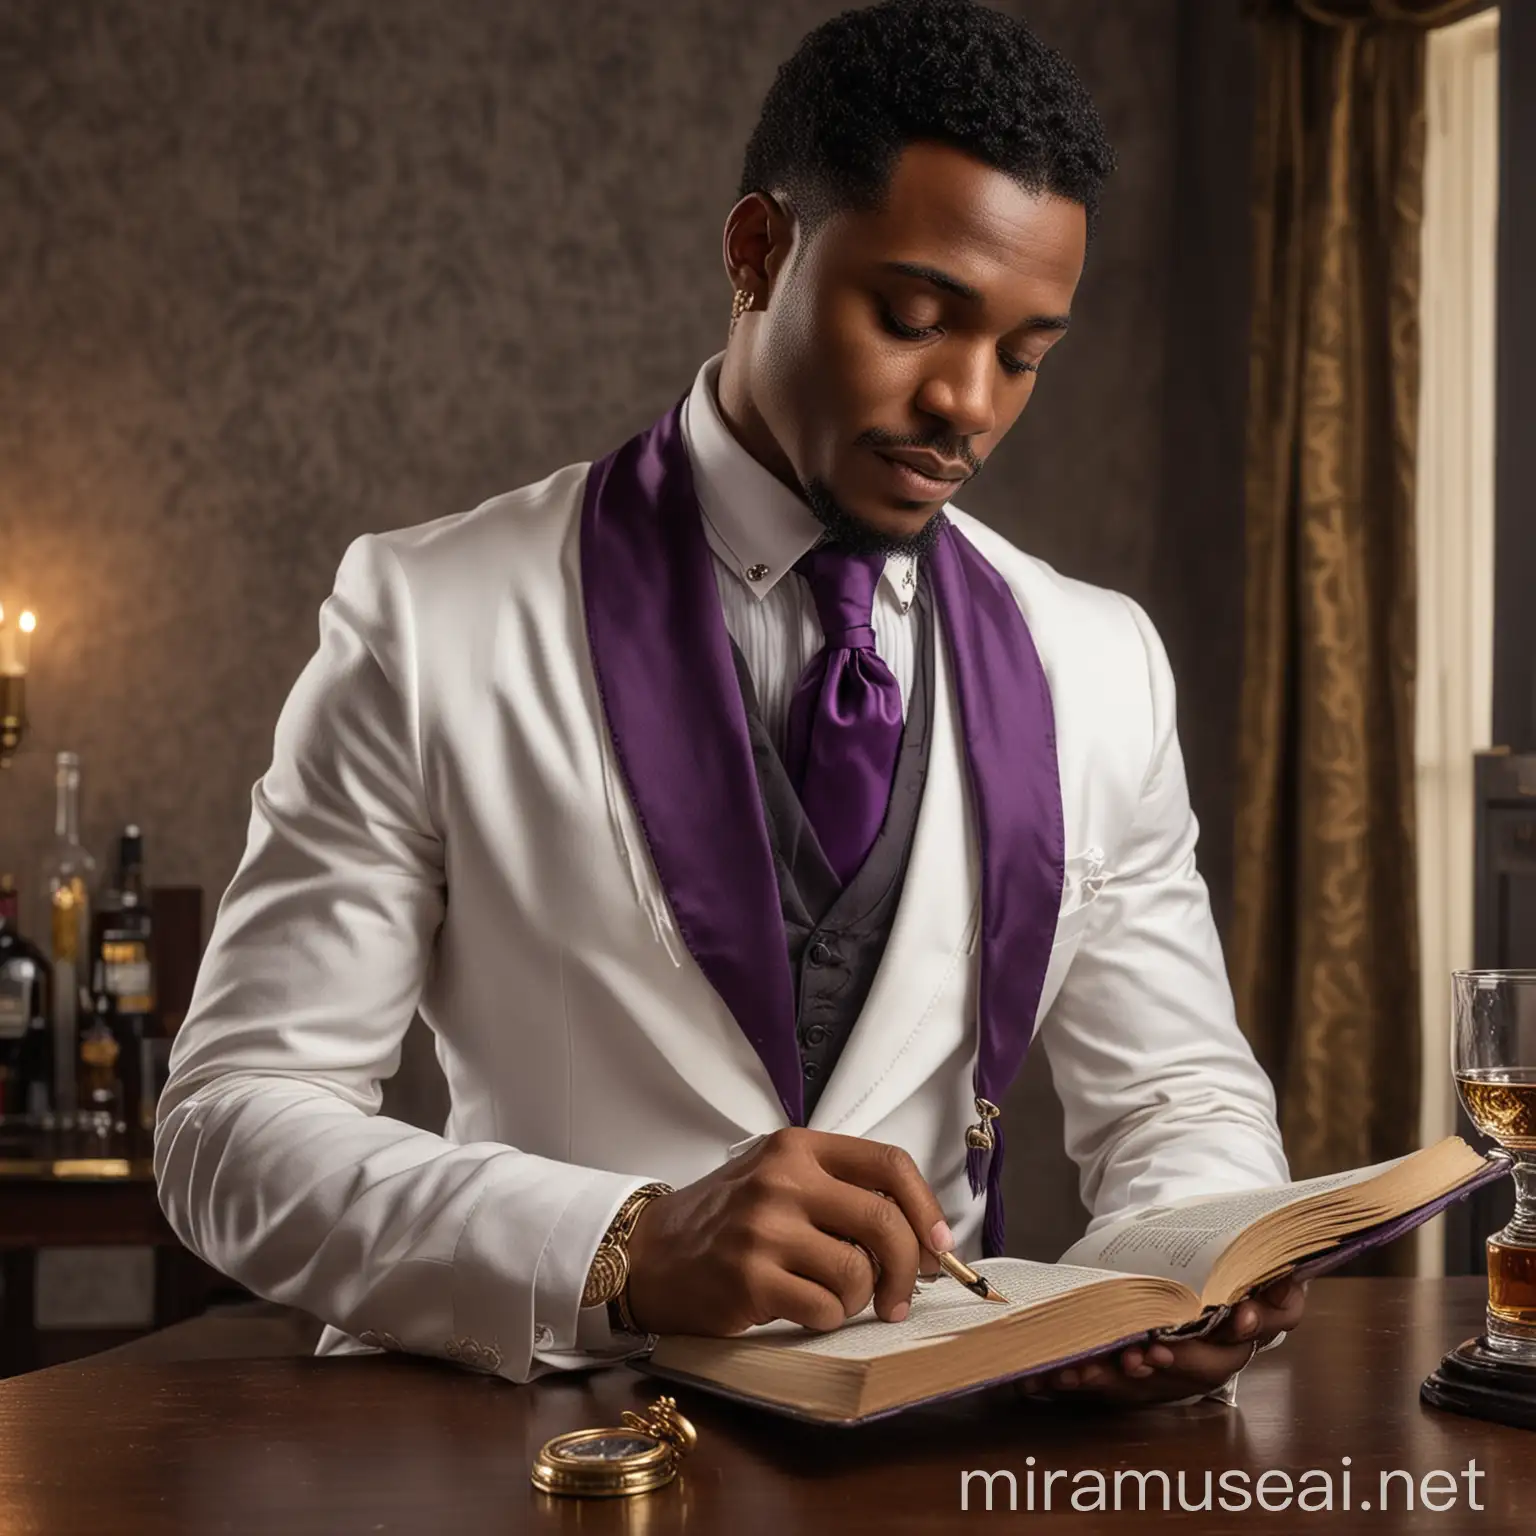 Stylish Black Man in Elegant Suit Reading Book with Whiskey